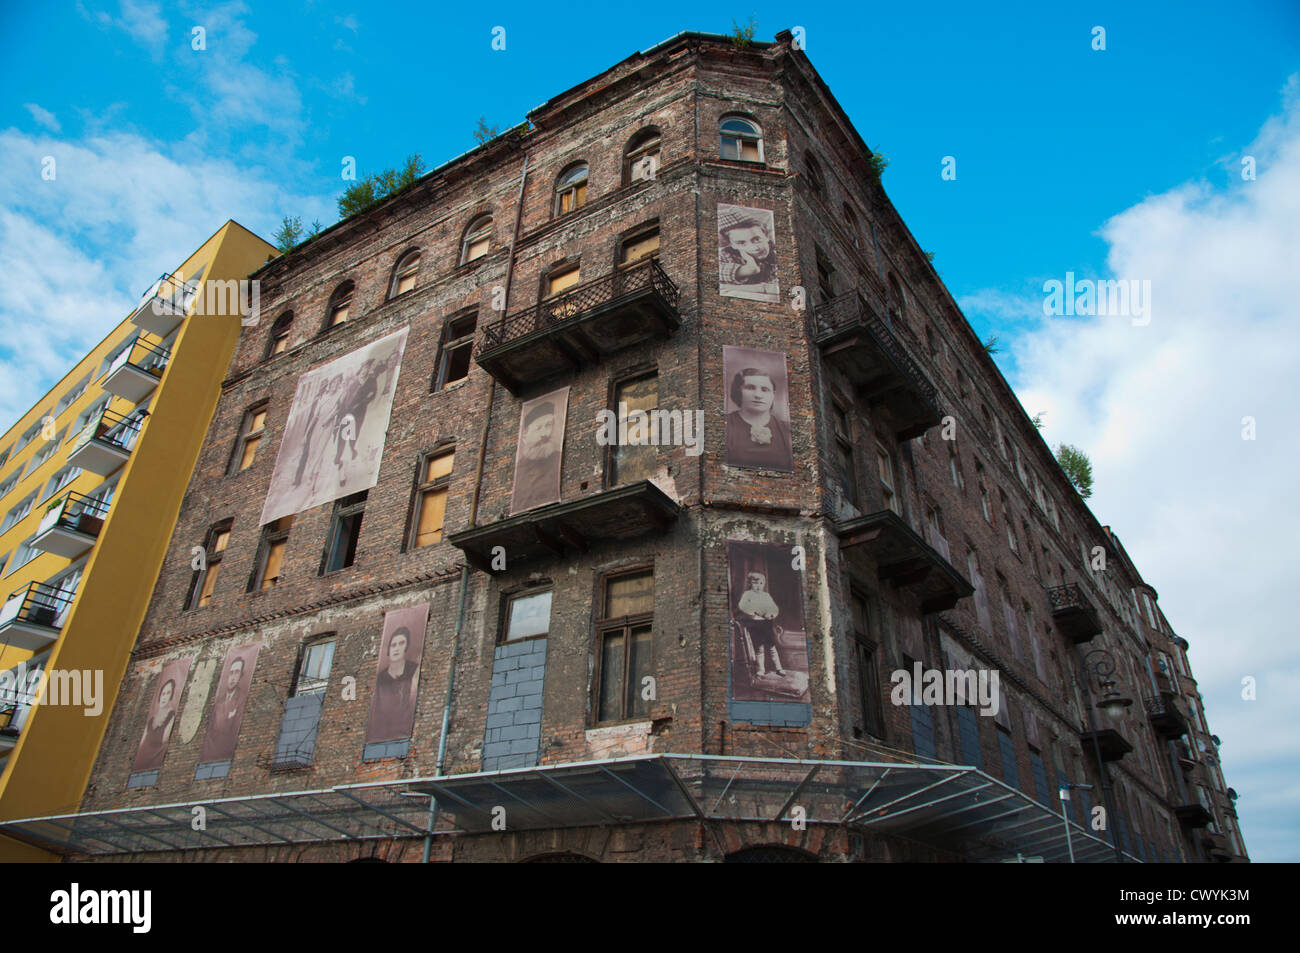 One of last remaining houses of Warsaw Ghetto along ulica Prozna street Muranow central Warsaw Poland Europe Stock Photo